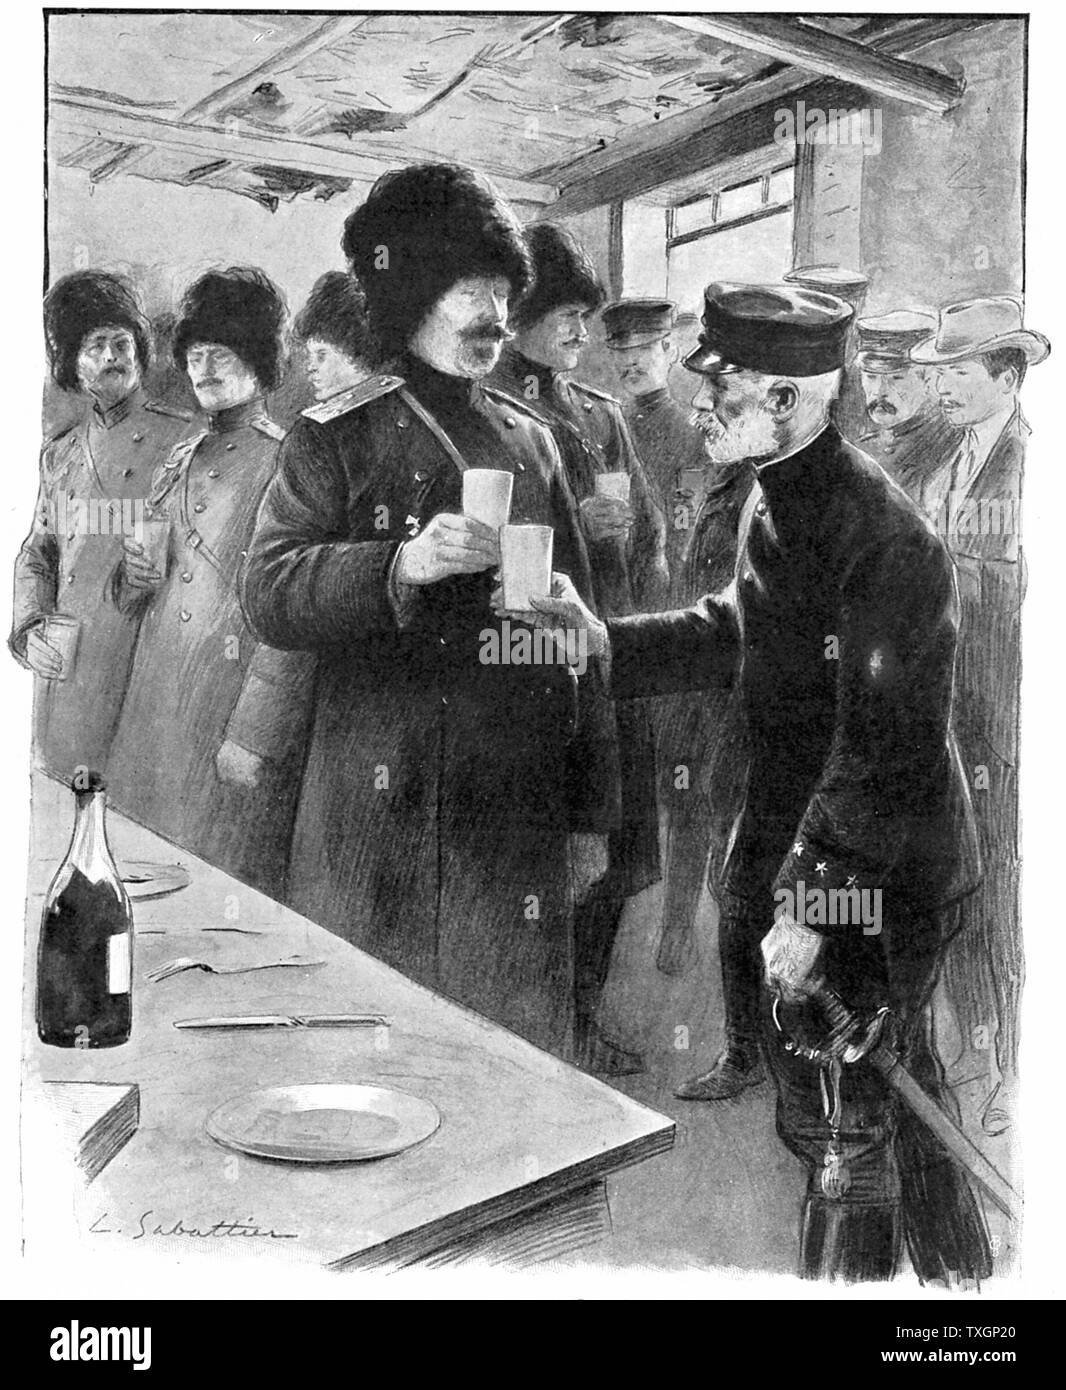 Russo-Japanaese War: Generals Stoessel (Russian) and Nogi (Japanese) sharing a toast after arranging terms for Russian capitulation of Port Arthur, 27 January 1905 Stock Photo